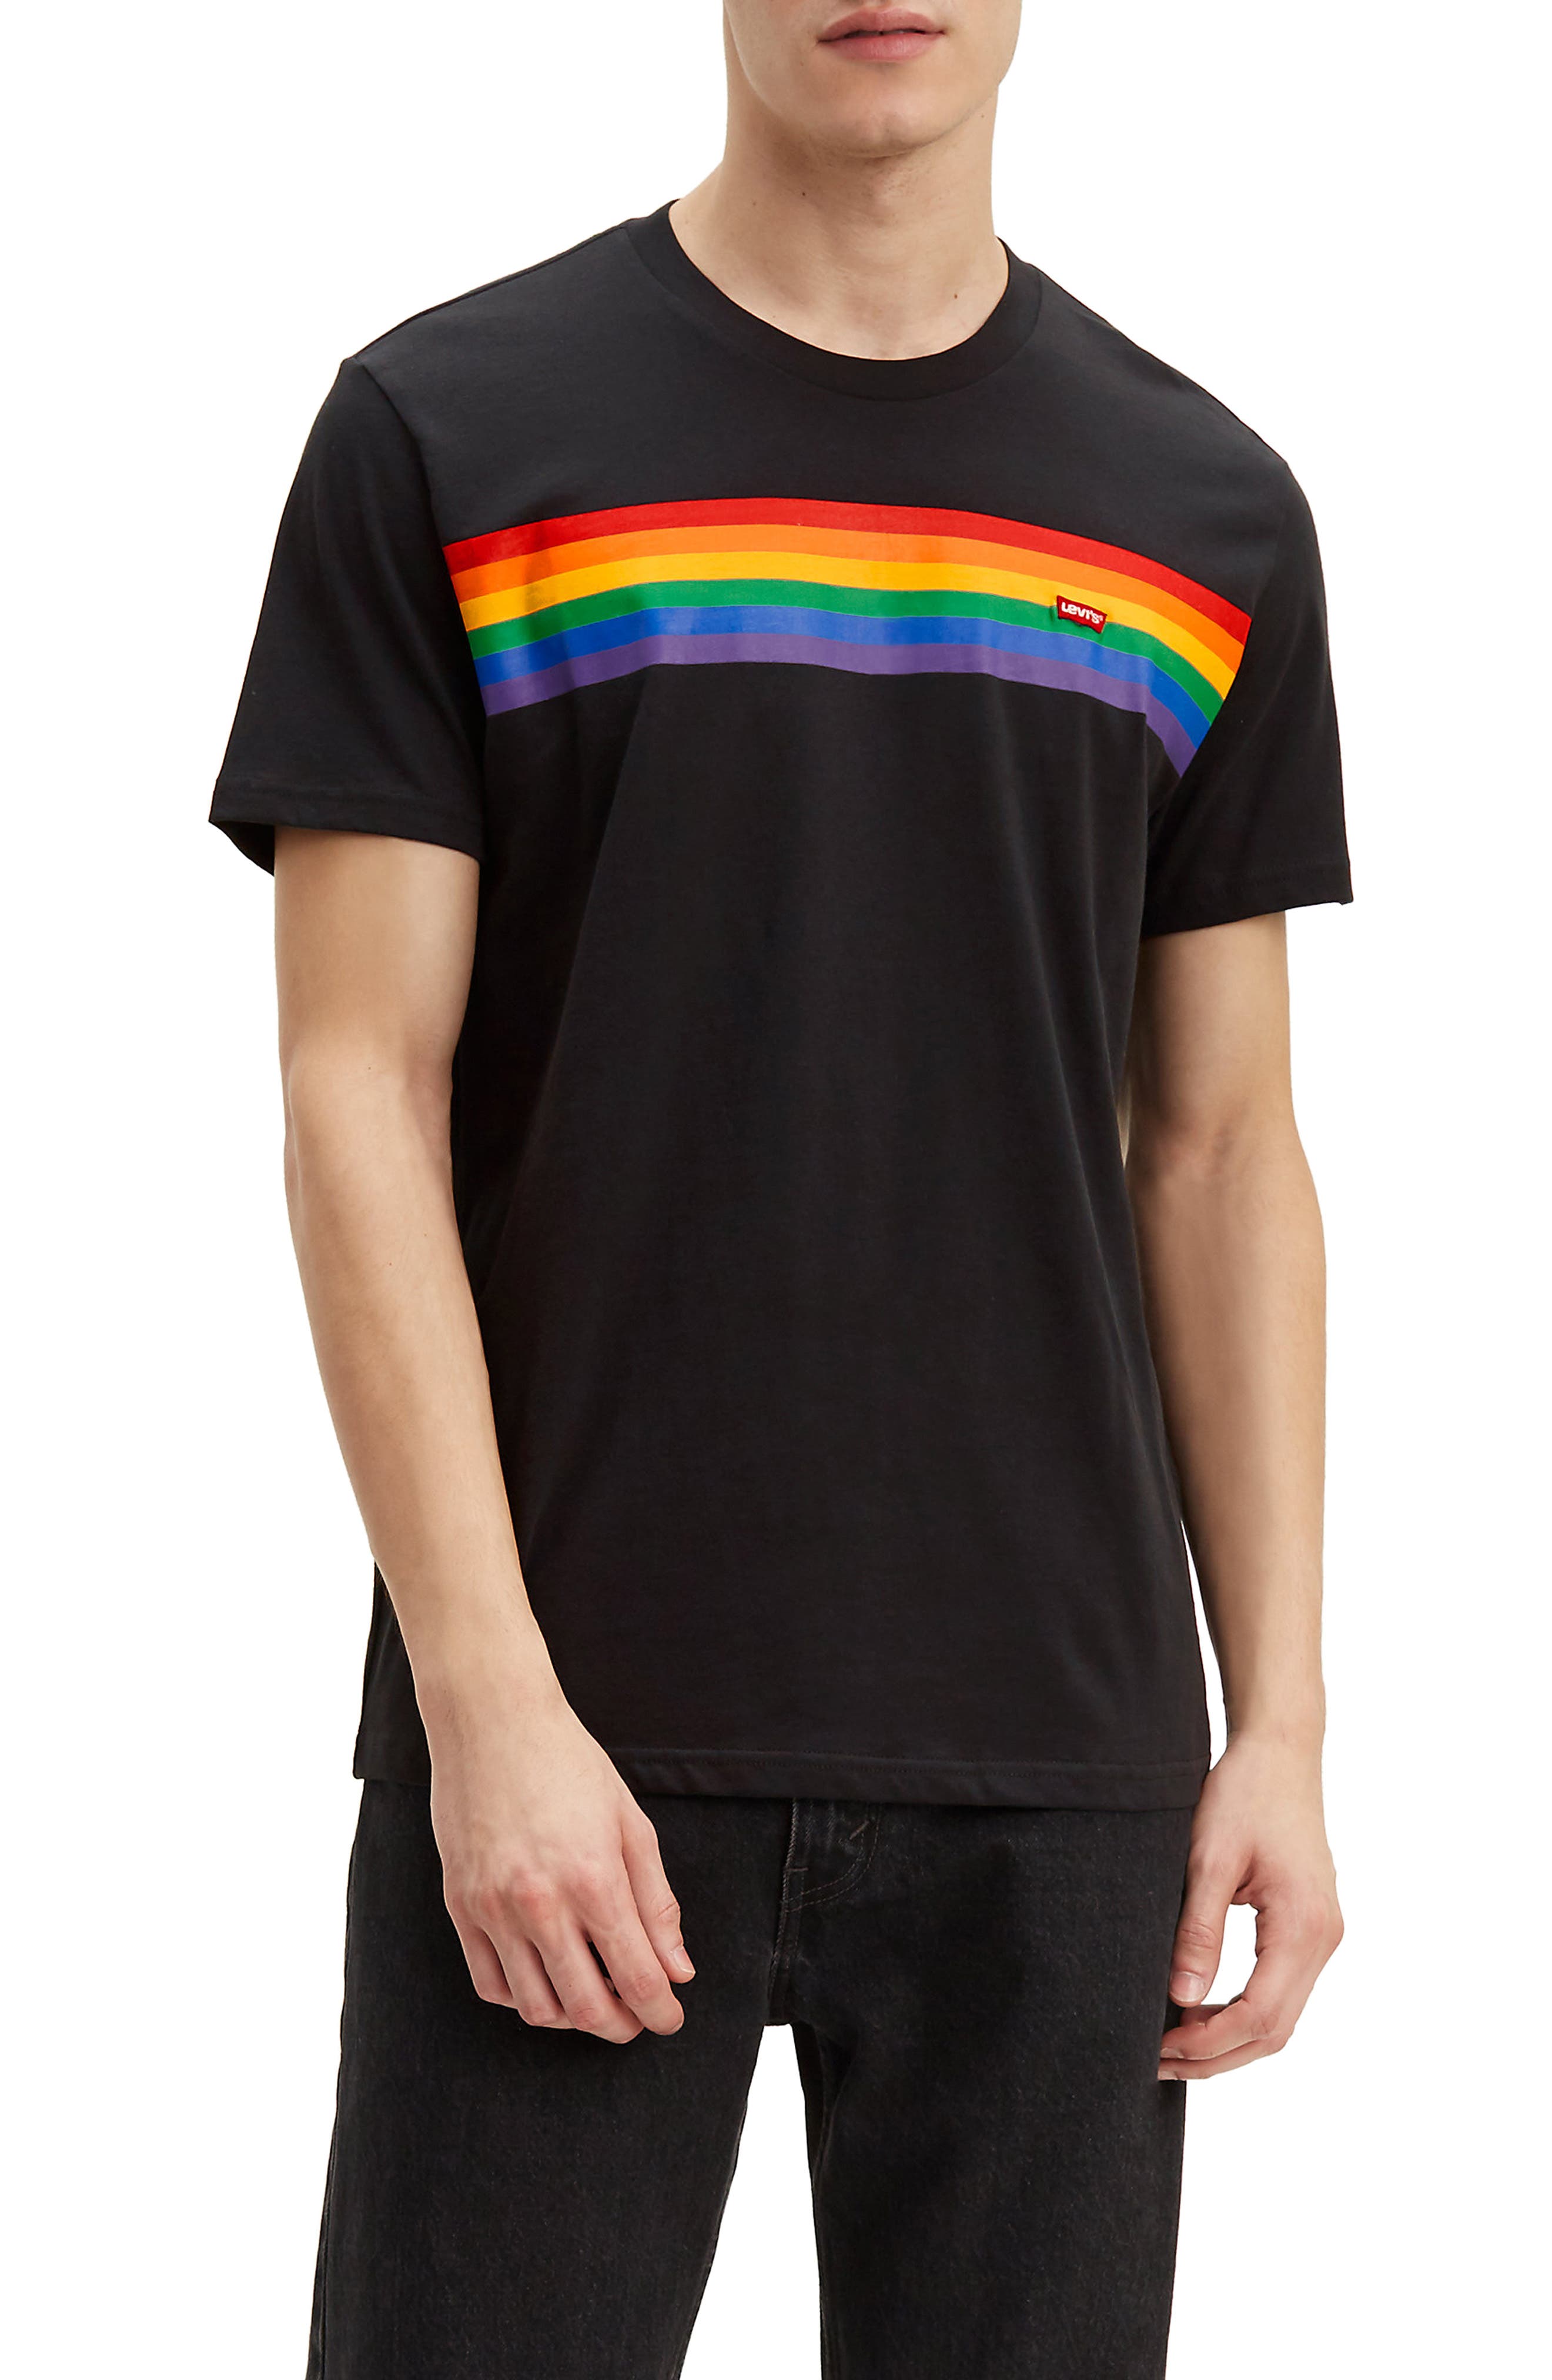 Definition Moans Beloved Levis Rainbow Outlet, SAVE 59%.